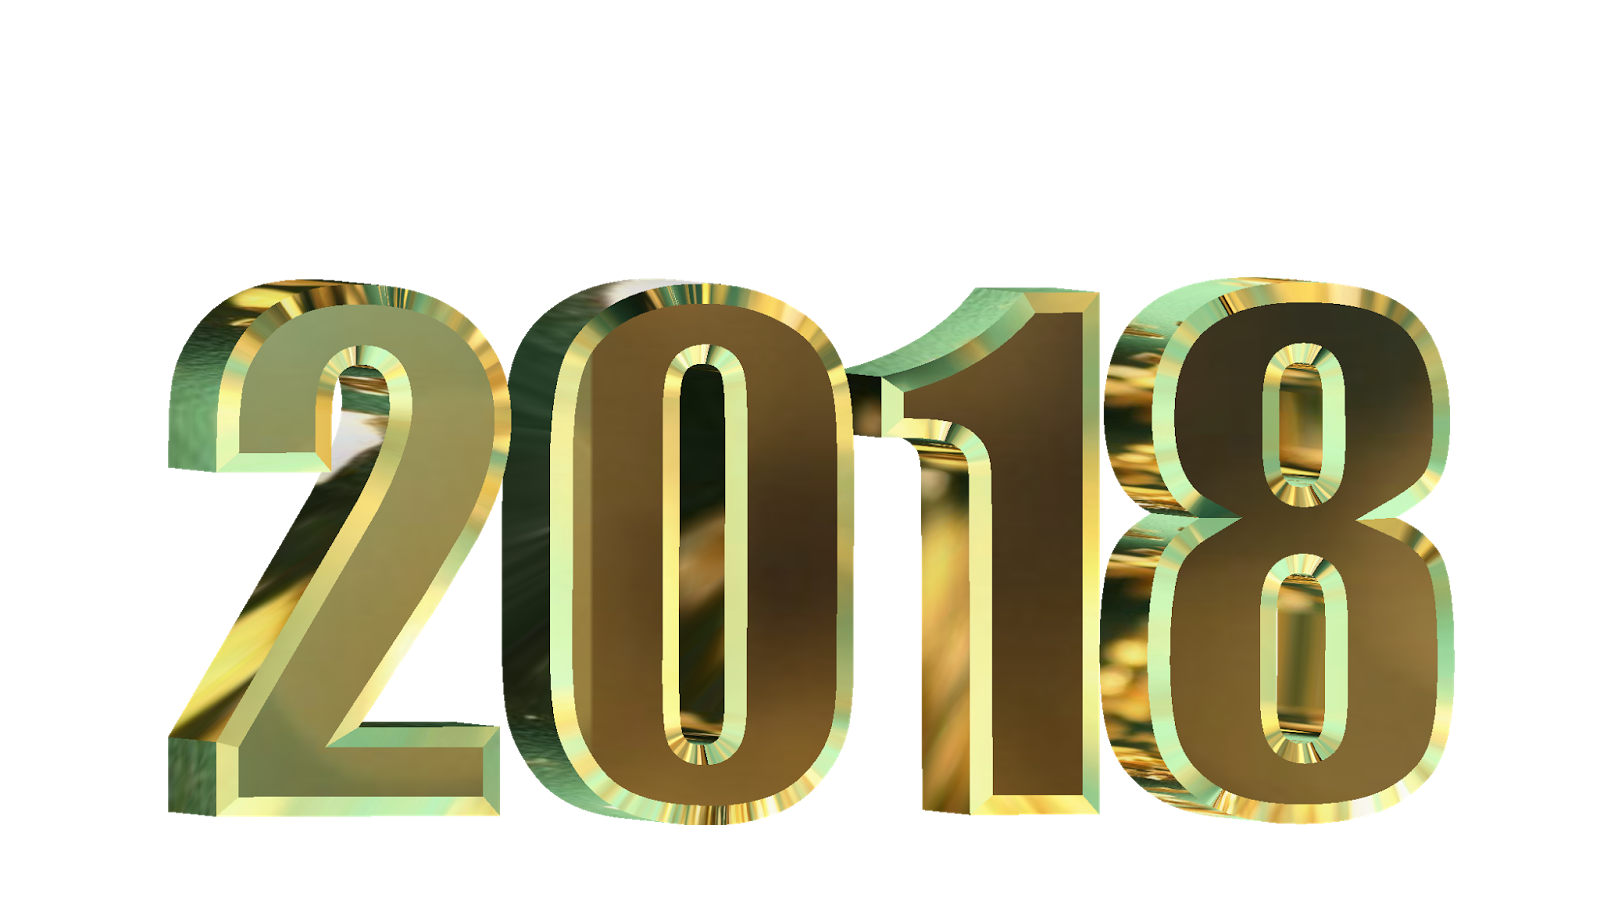 New Year 2018 3D sign | PSDGraphics